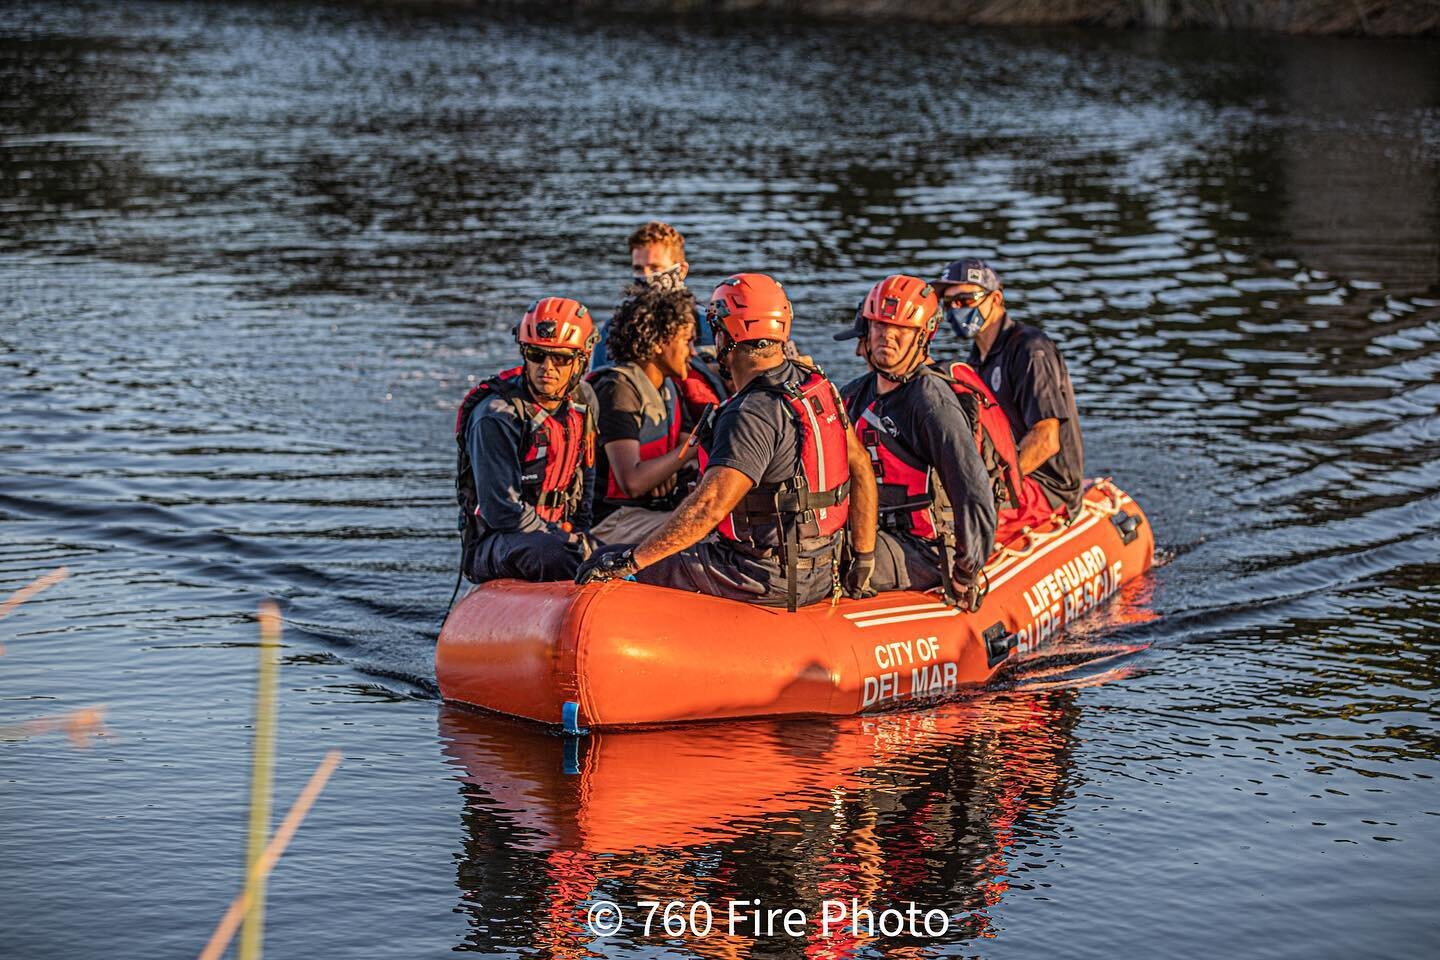 (Post 1/2) &ldquo;Valley IC&rdquo; 9-1-2020
.
.
The Rancho Santa Fe Fire District along with, the San Diego Fire Department, Encinitas Fire Department, Cal Fire San Diego, San Diego Lifeguards, and Del Mar life guards. Conducted a water rescue in 4S 